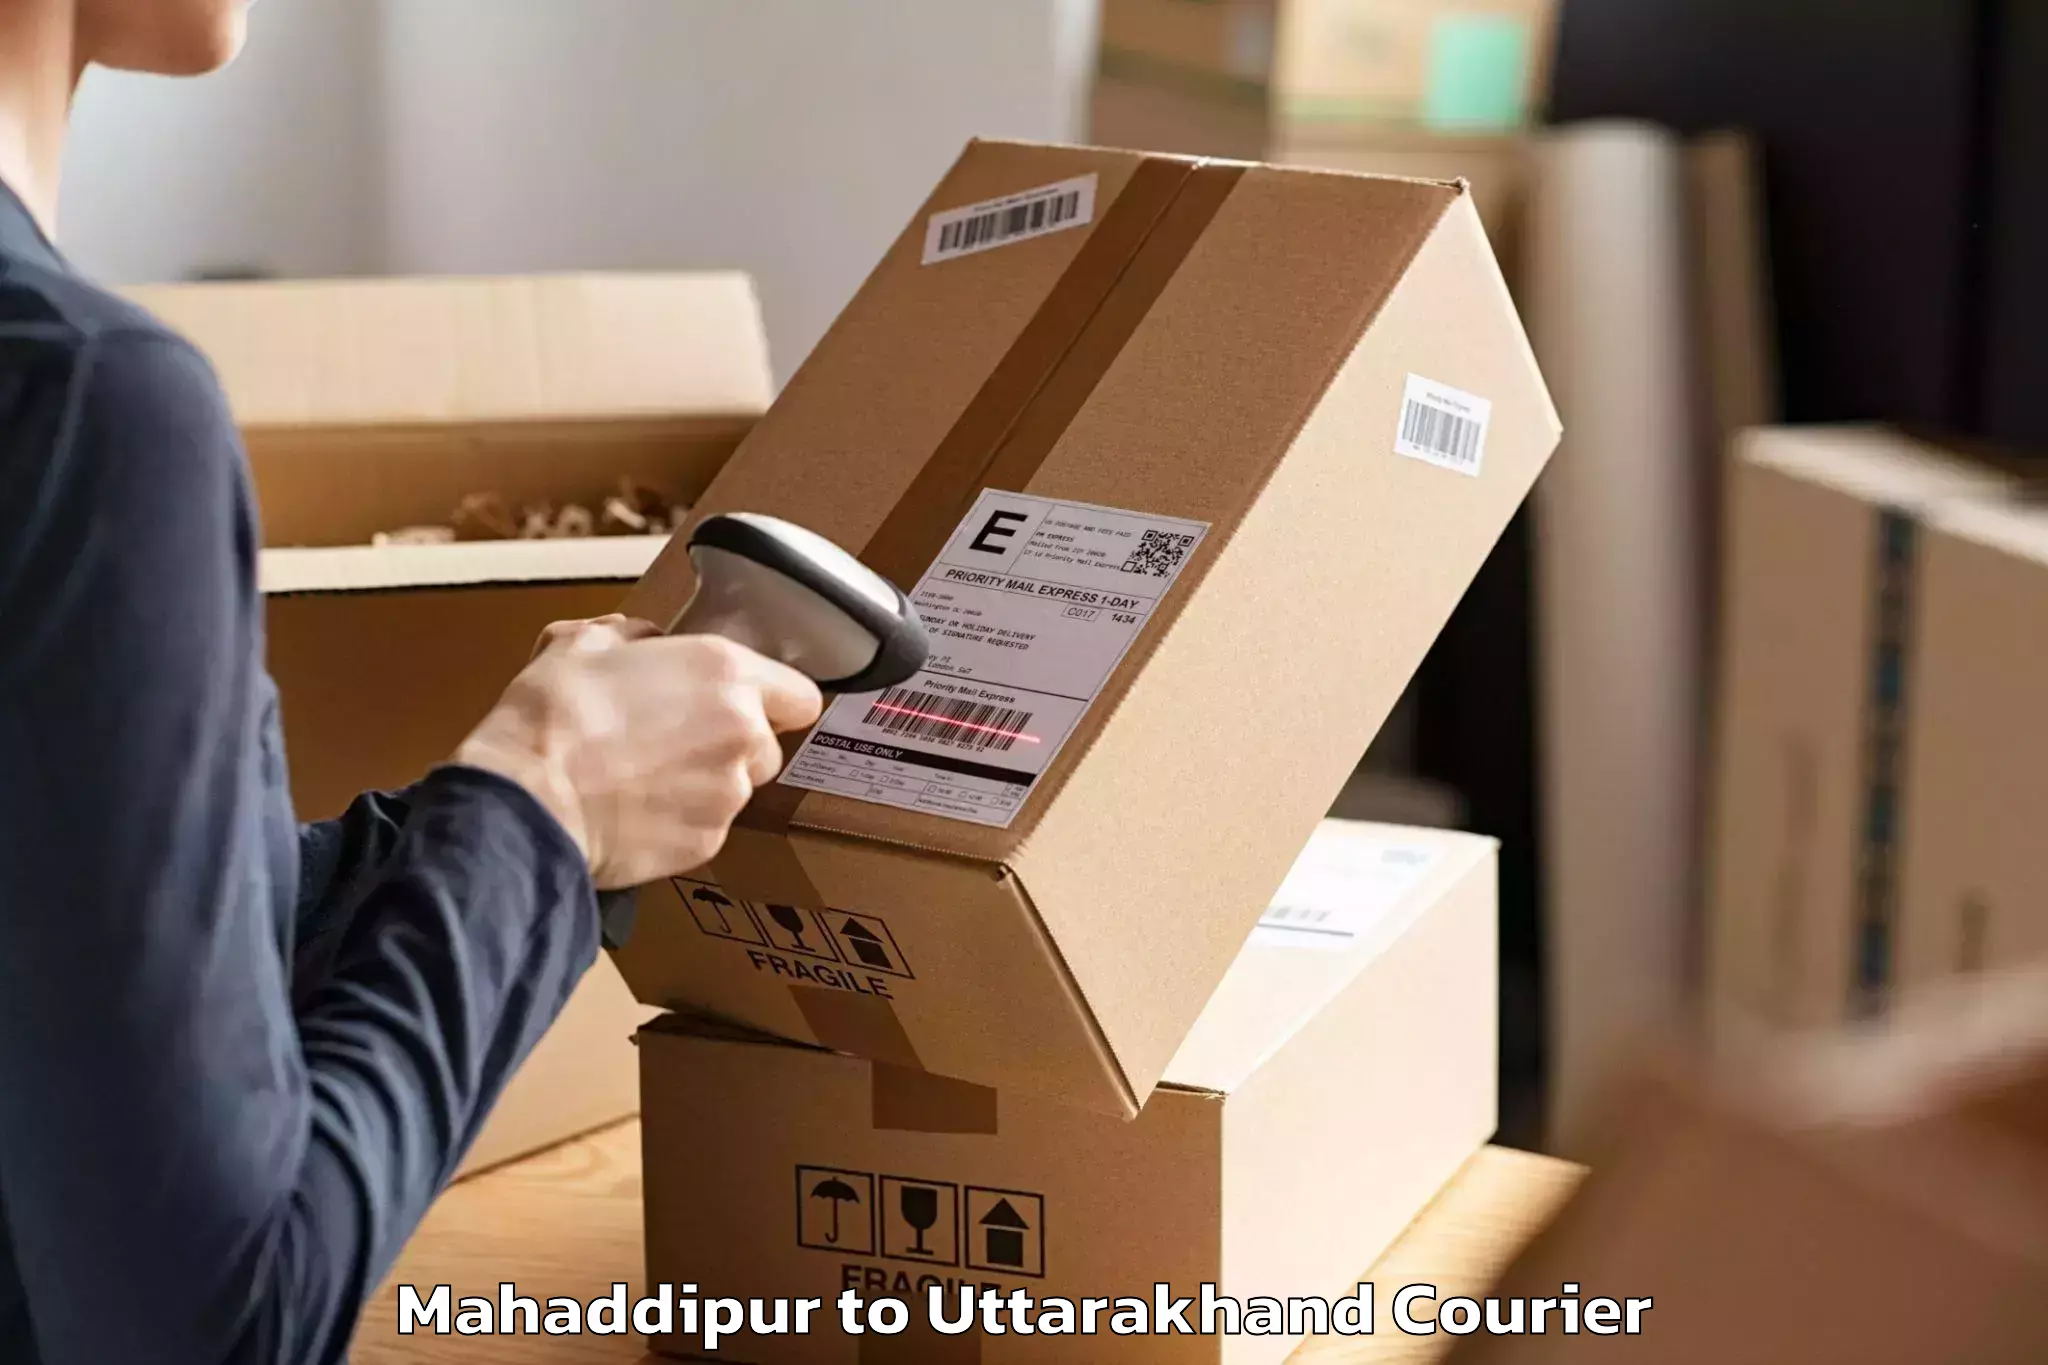 Furniture relocation services Mahaddipur to Pauri Garhwal